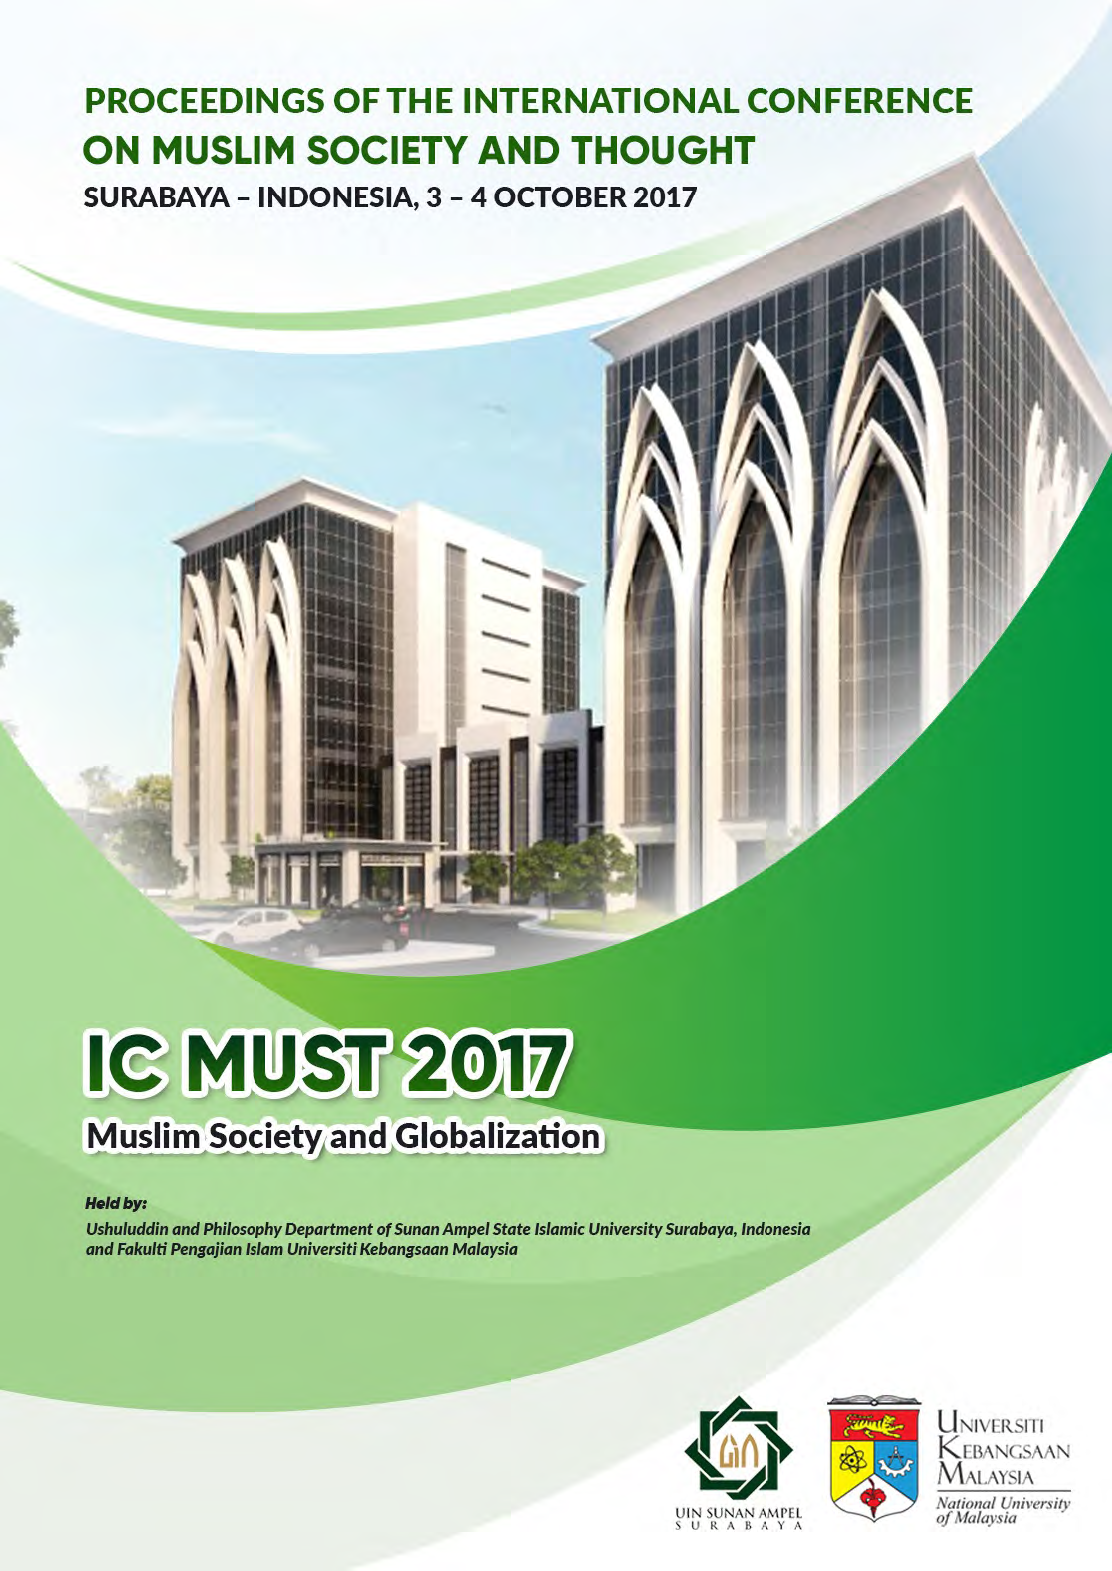 IC-MUST 2017